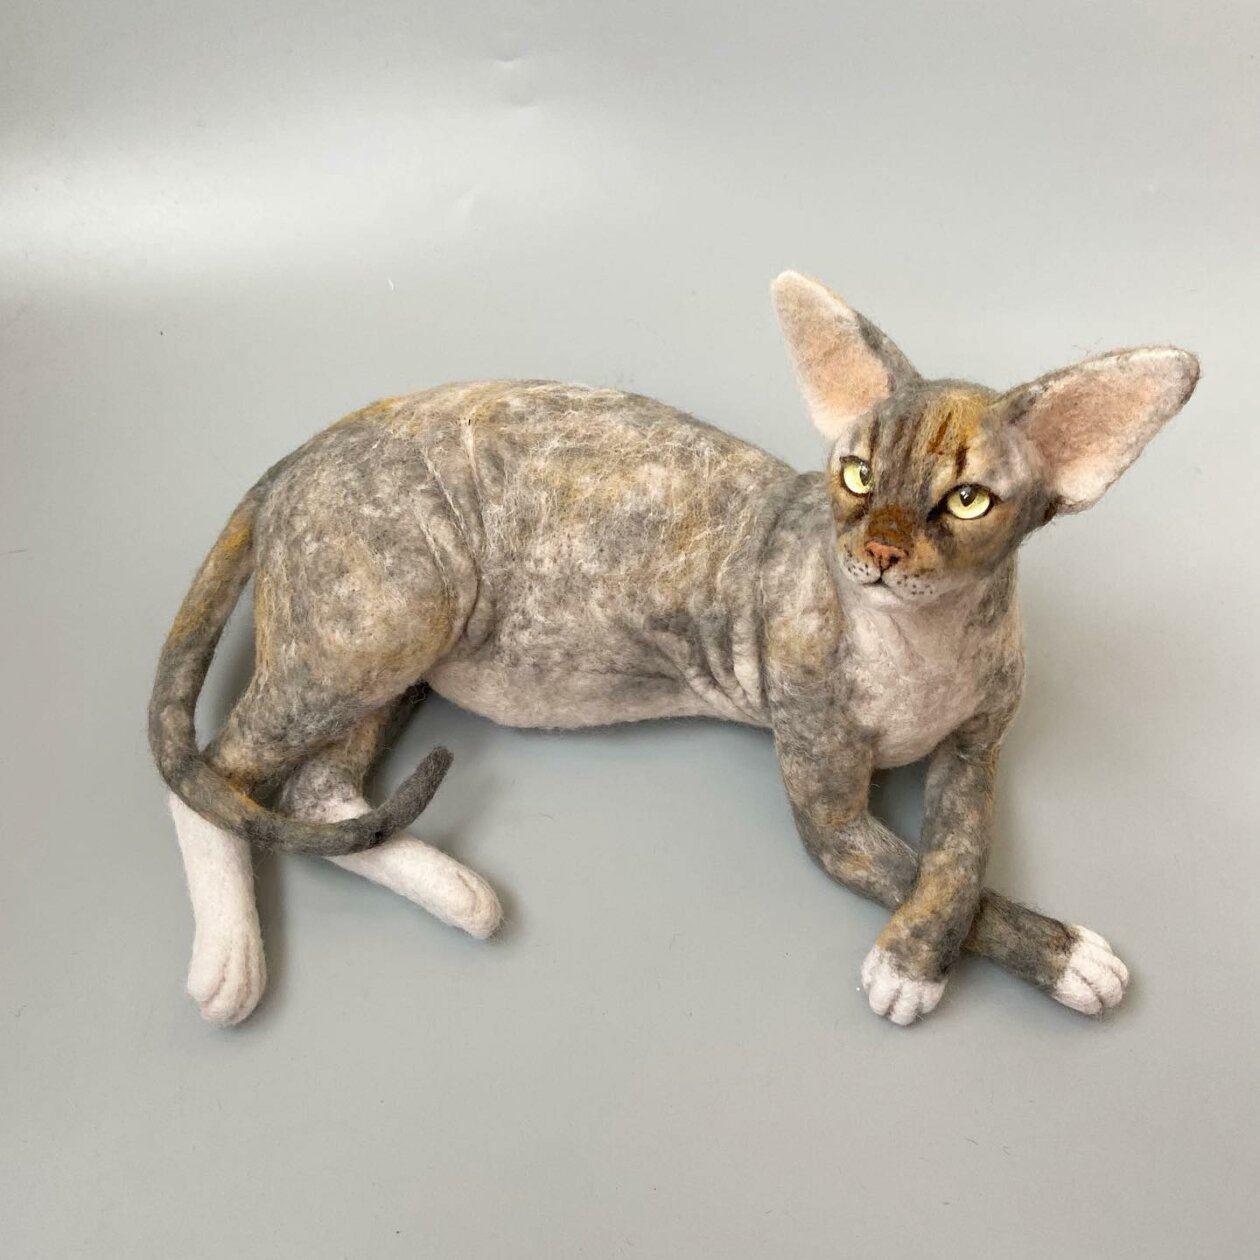 Hyper Realistic Animal Felted Wool Sculptures By Alla Rebrova (24)